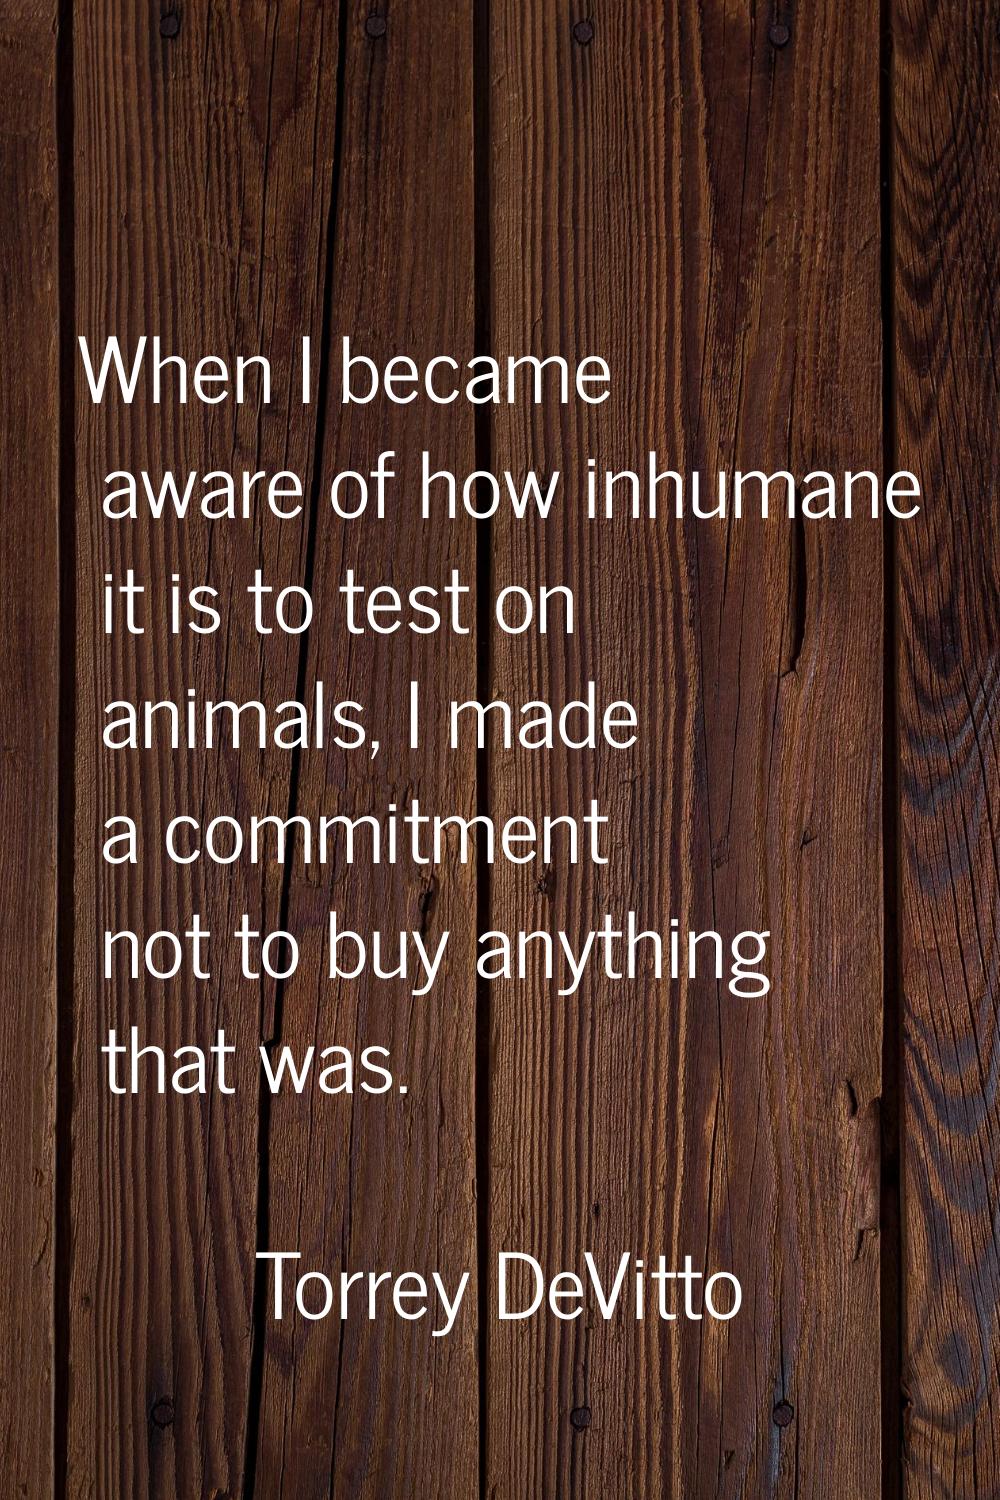 When I became aware of how inhumane it is to test on animals, I made a commitment not to buy anythi